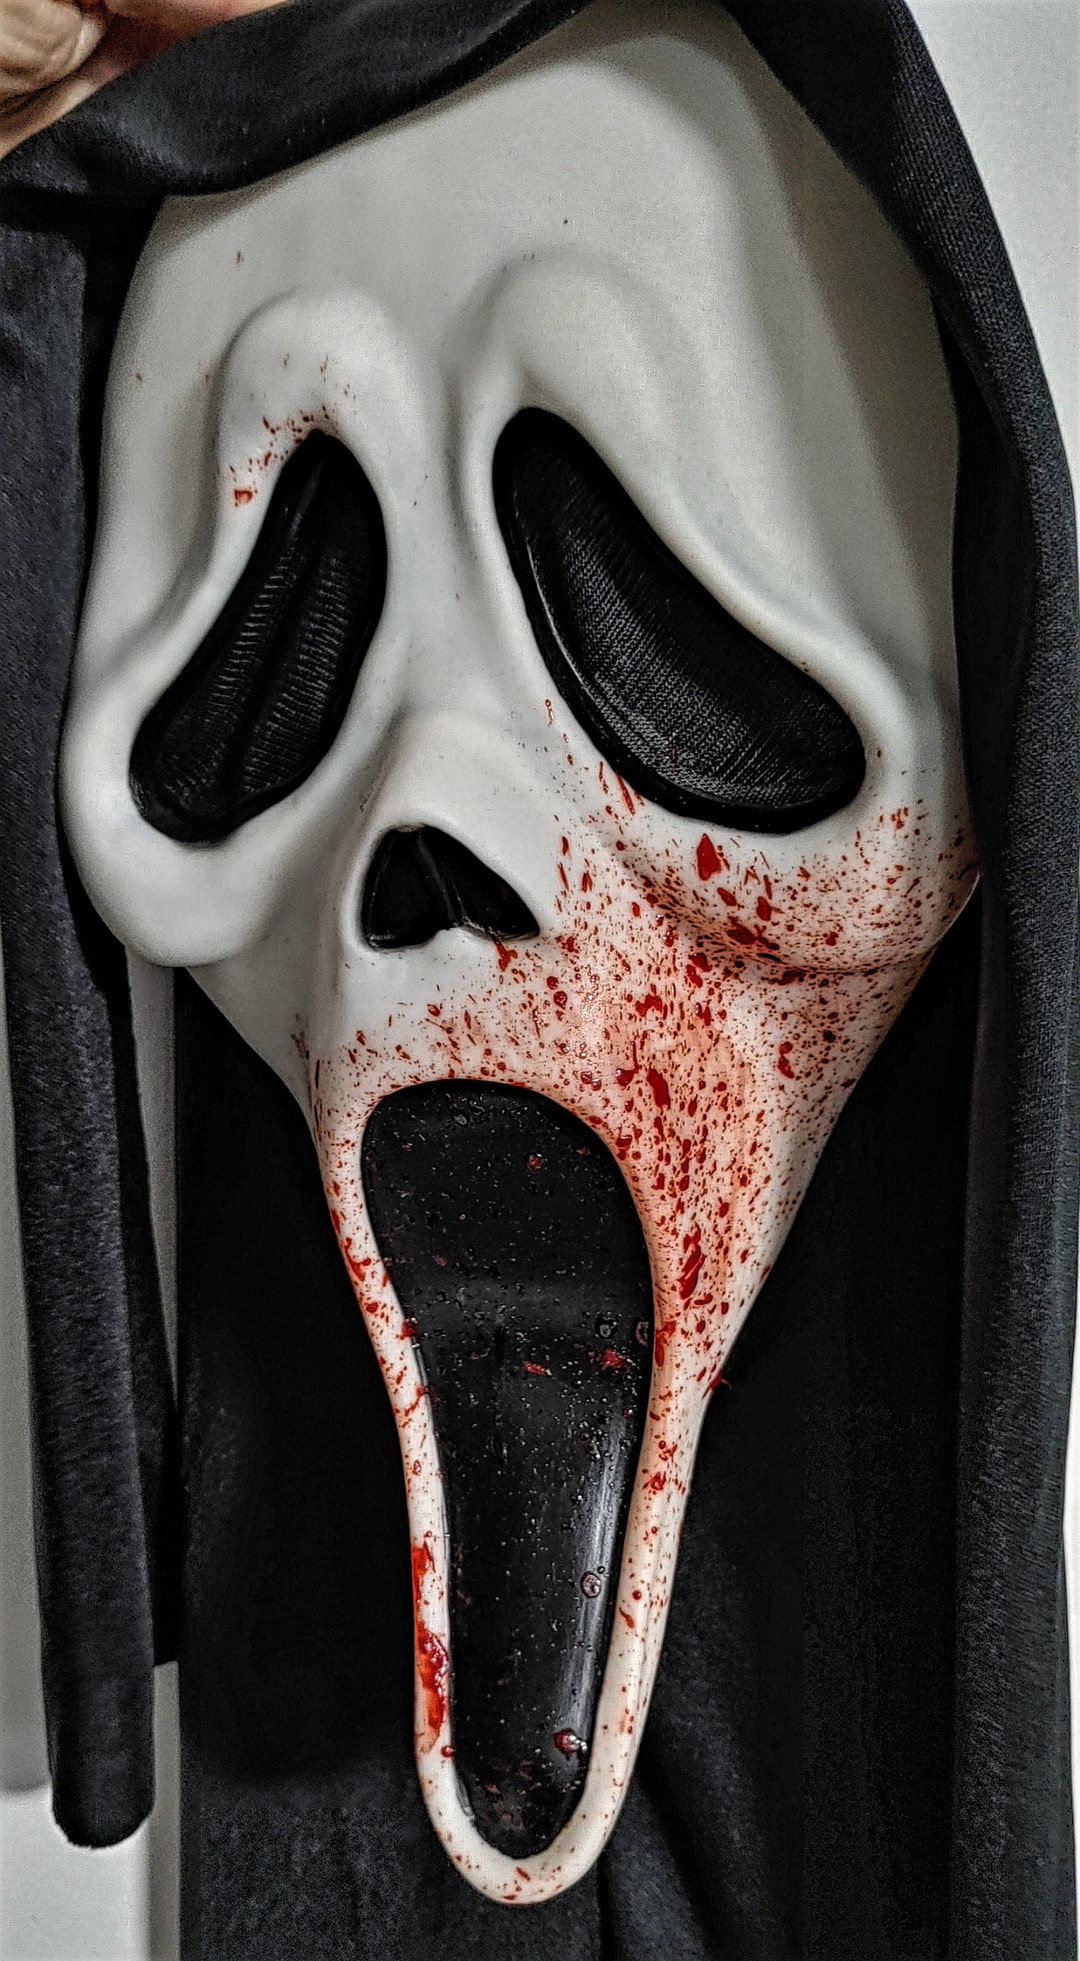 Scream 6 Ghostface Mask In Display Frame Case Horror Movie Collectible Prop  Mask